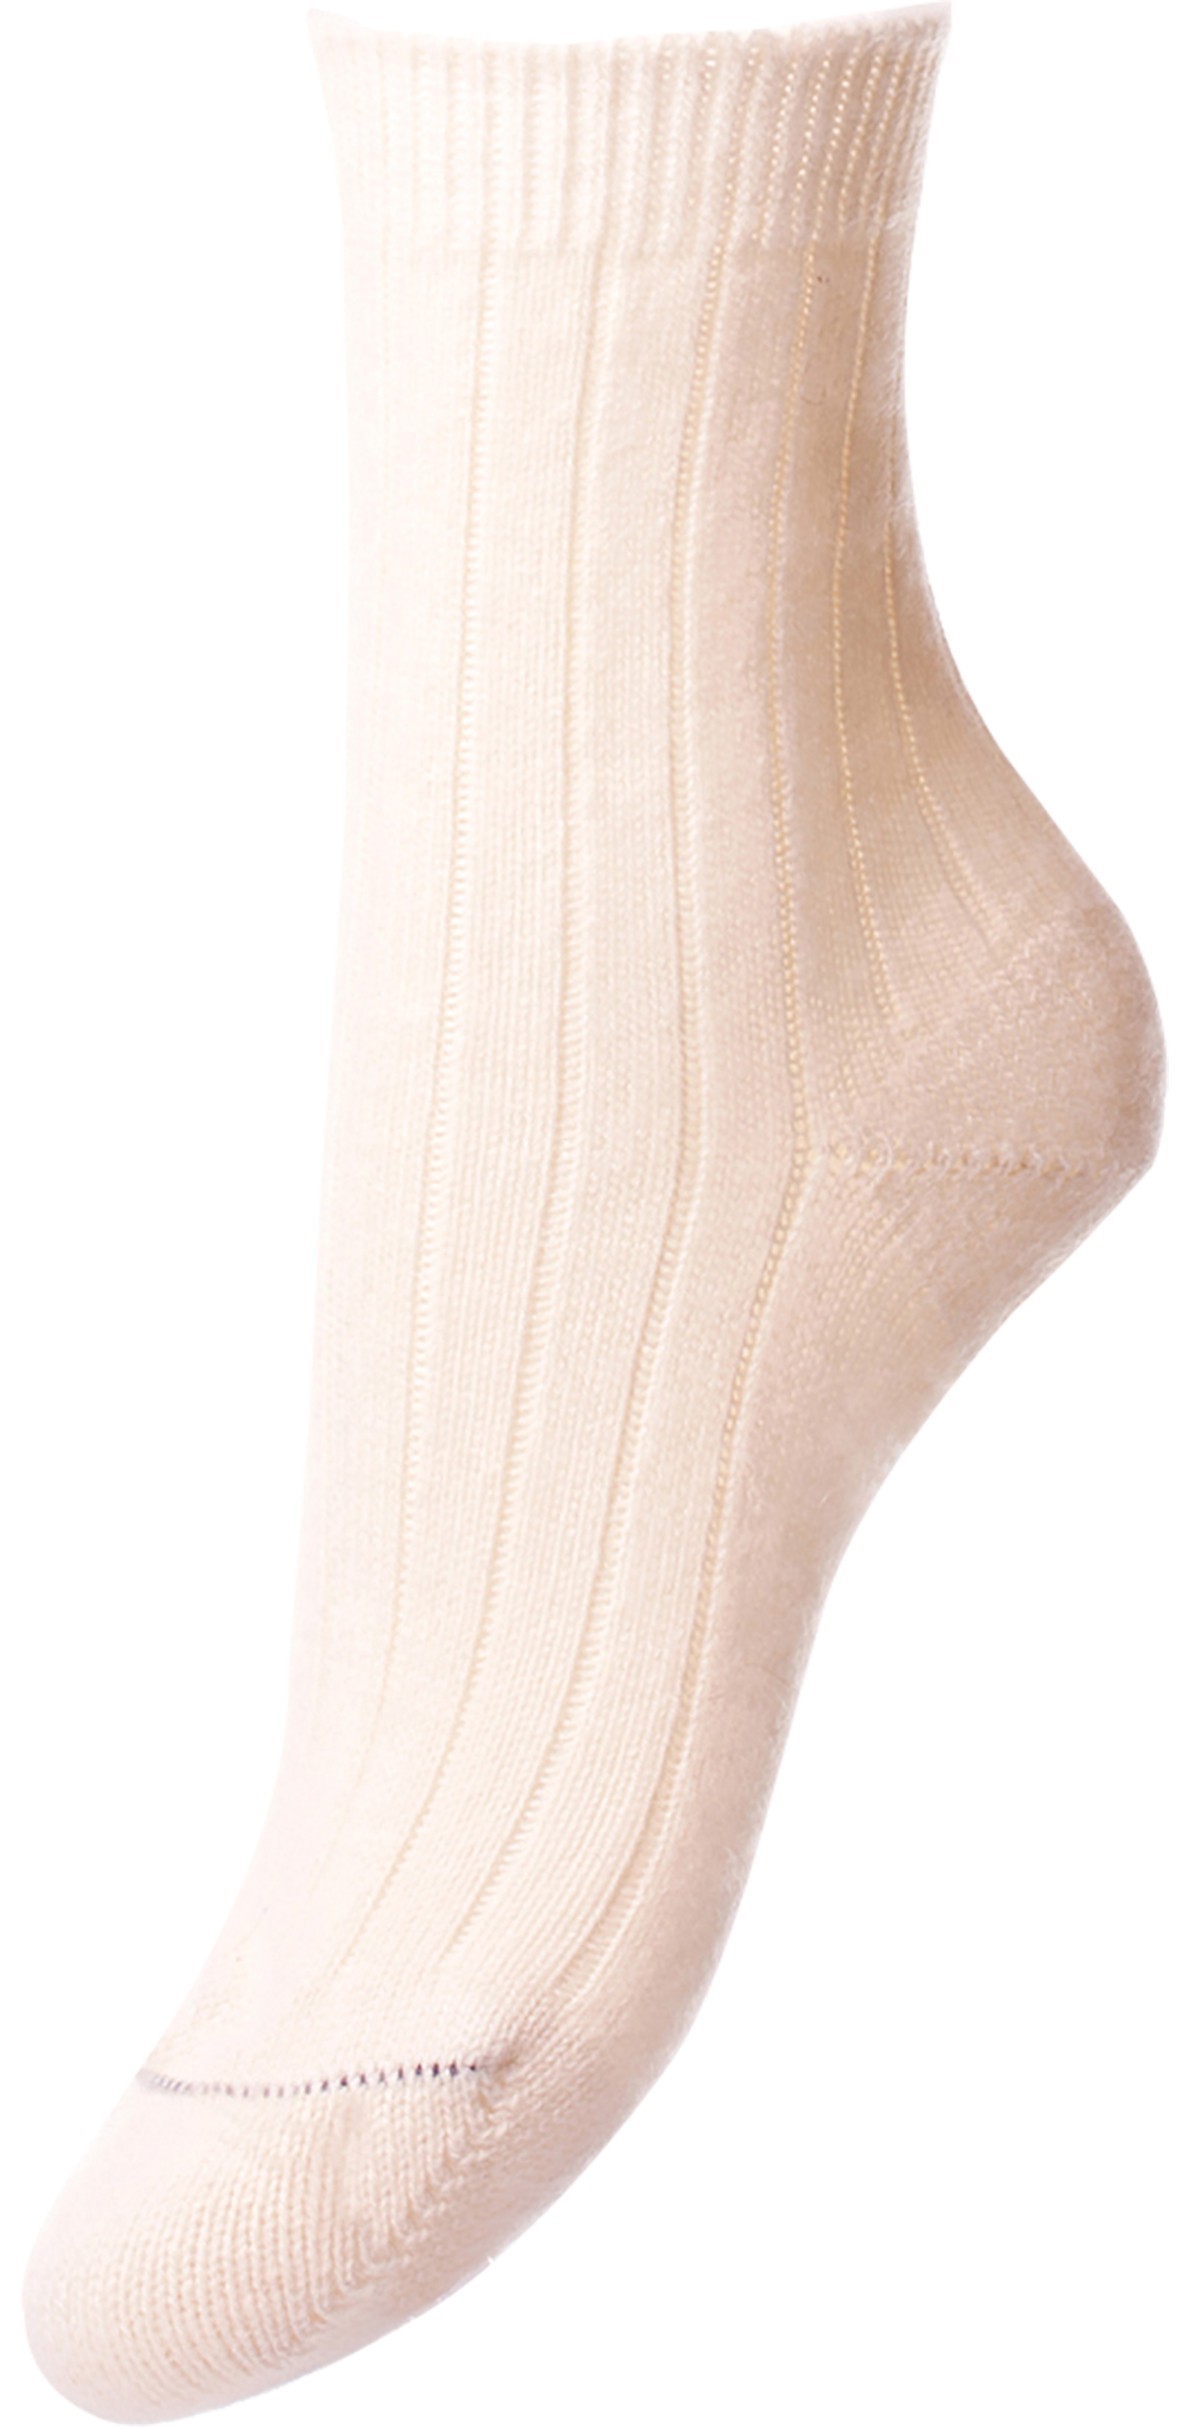 Pantherella Women's Tabitha Cashmere Ribbed Anklet Socks in Winter White